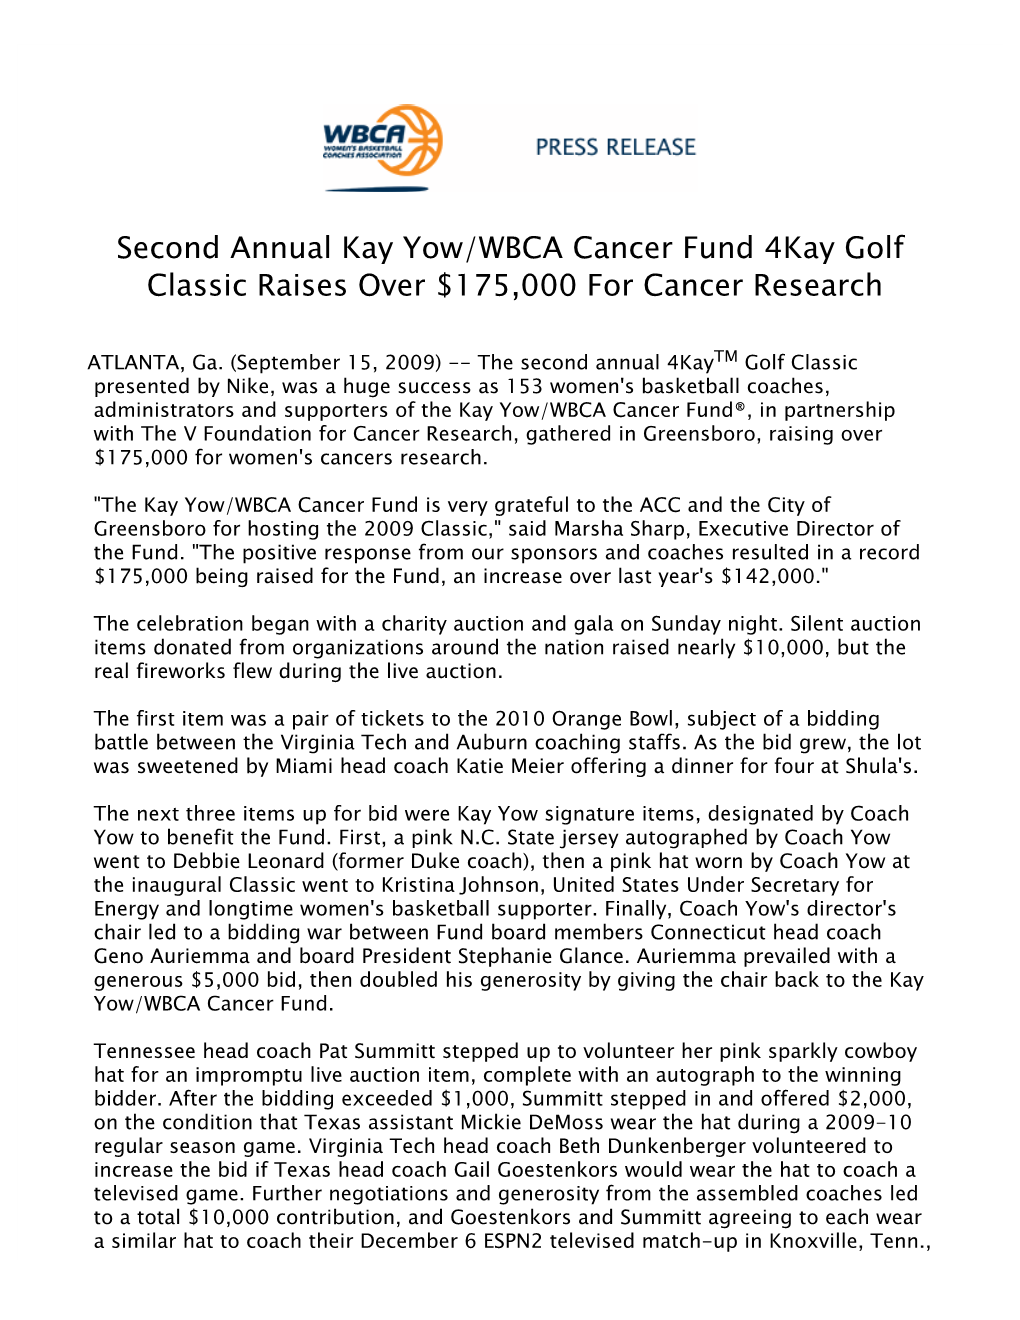 Second Annual Kay Yow/WBCA Cancer Fund 4Kay Golf Classic Raises Over $175,000 for Cancer Research